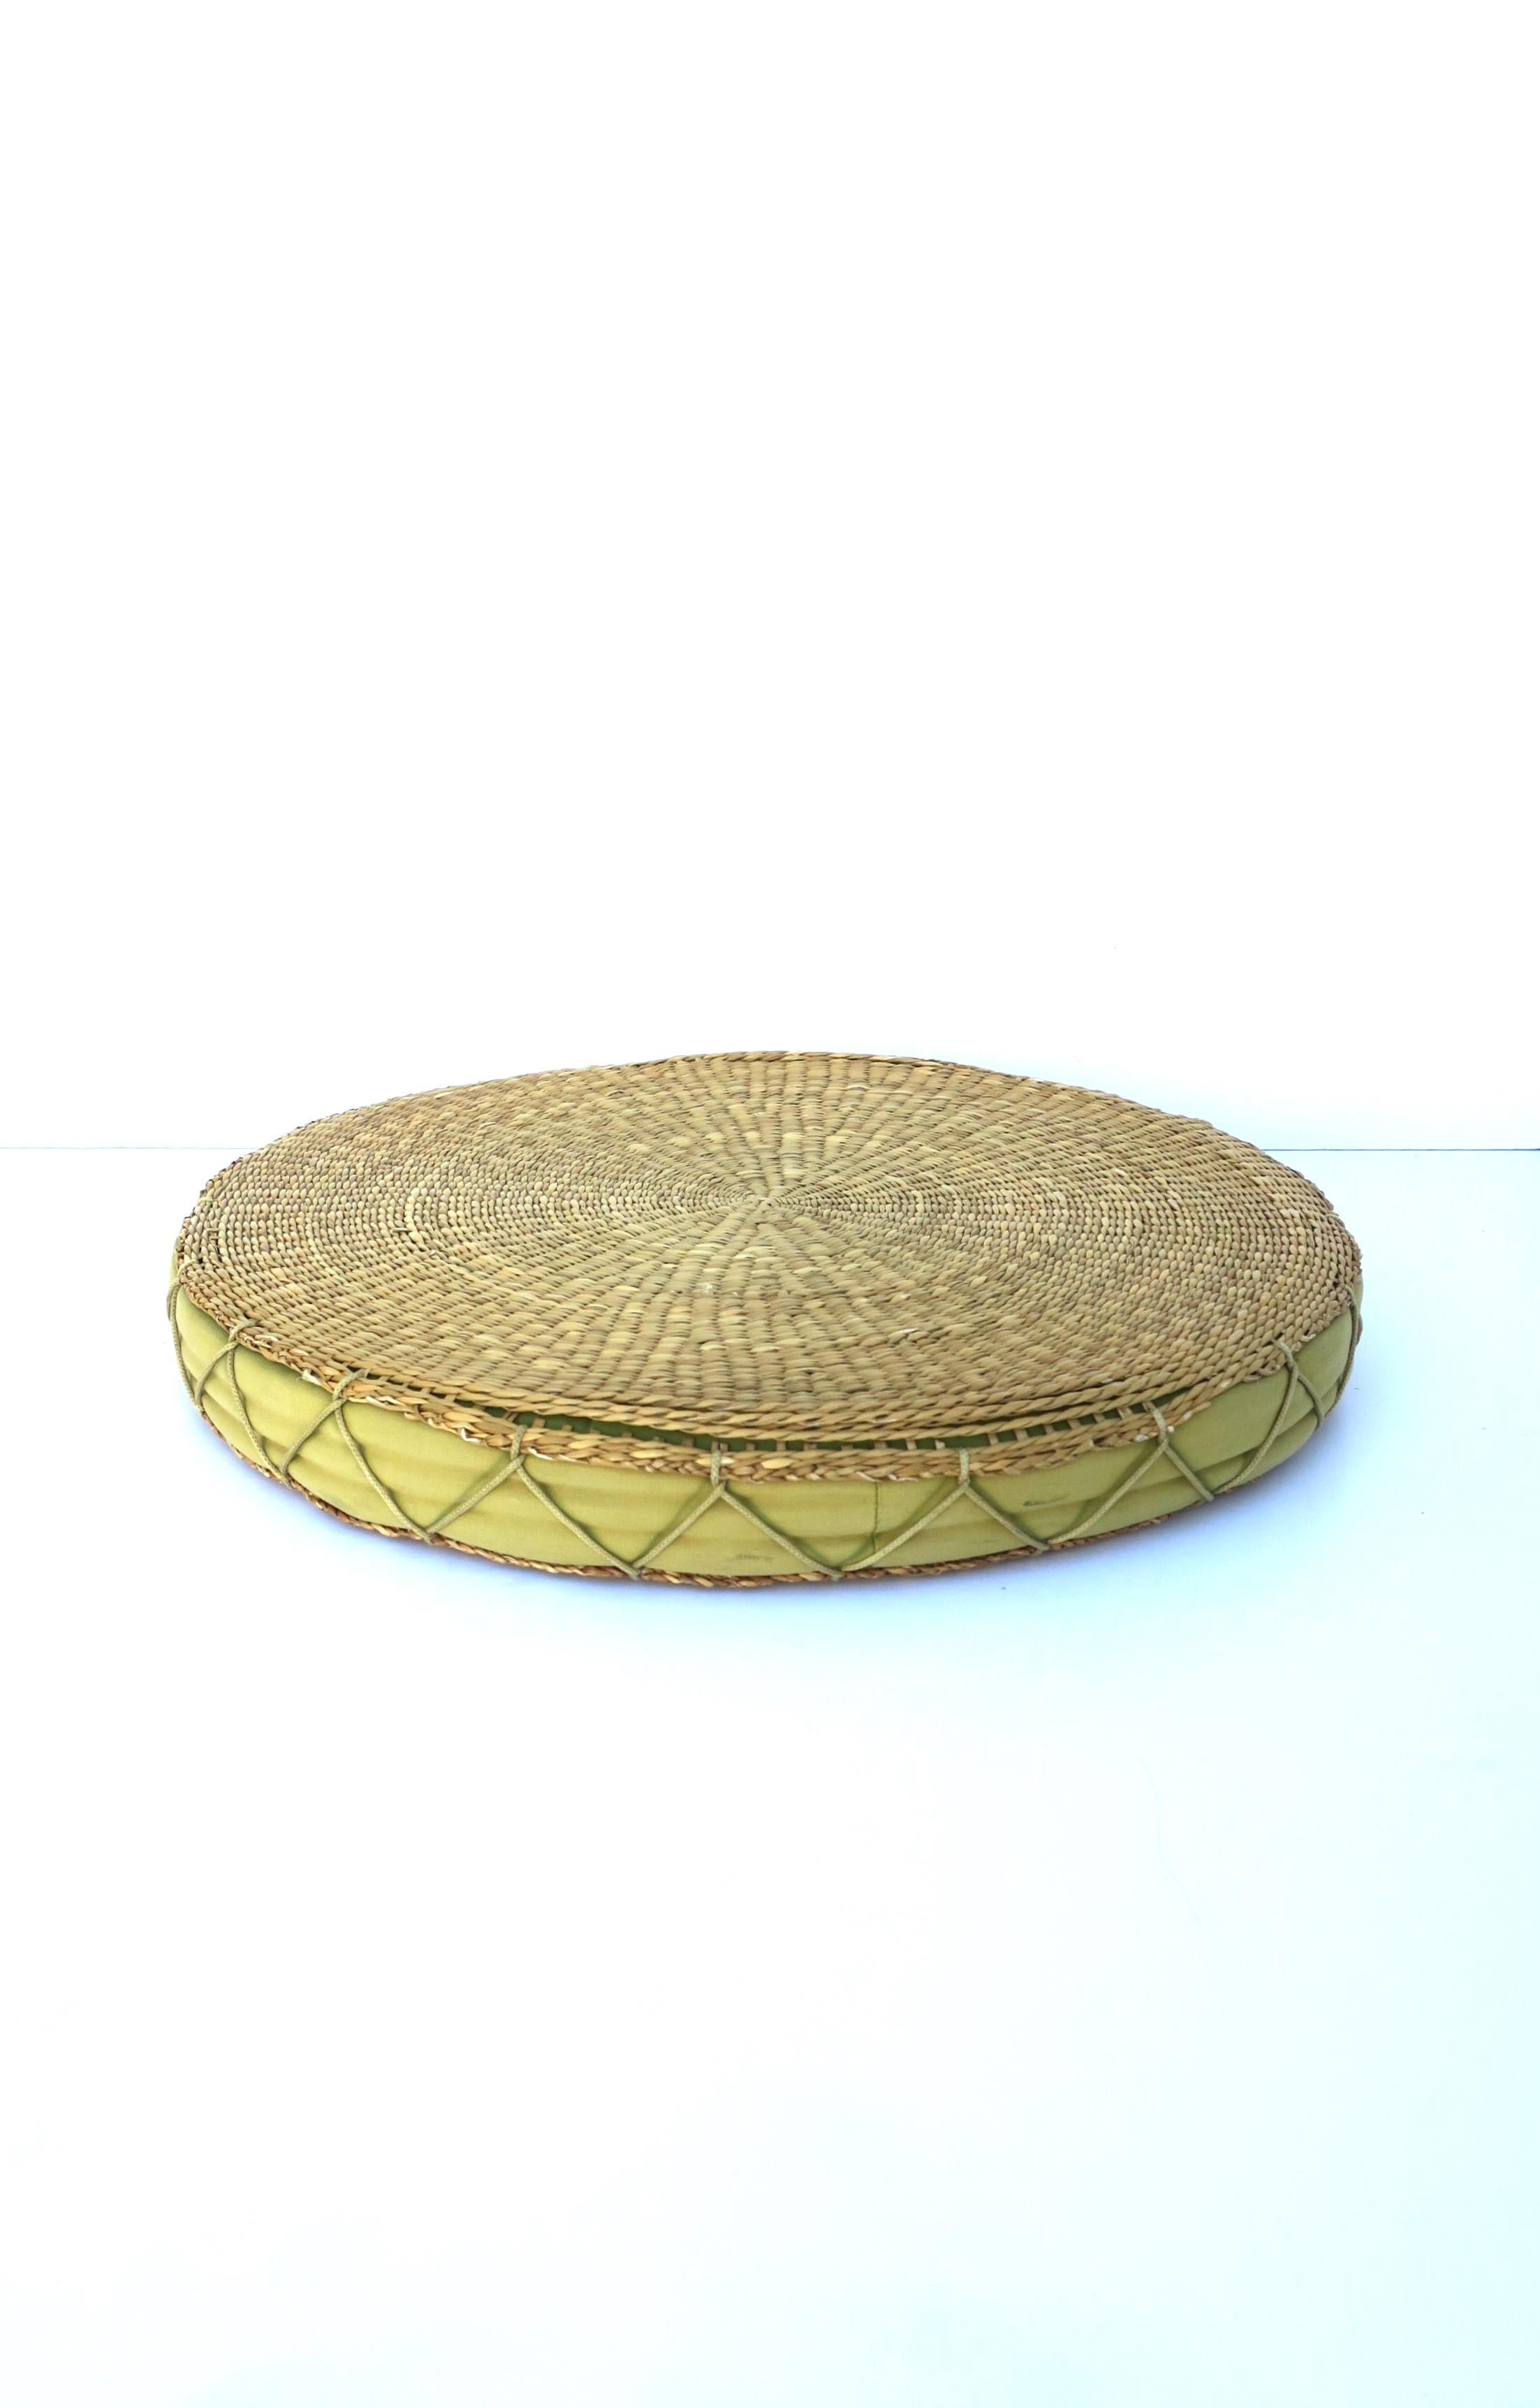 Bohemian Wicker Seat or Floor Cushion, Green and Tan For Sale